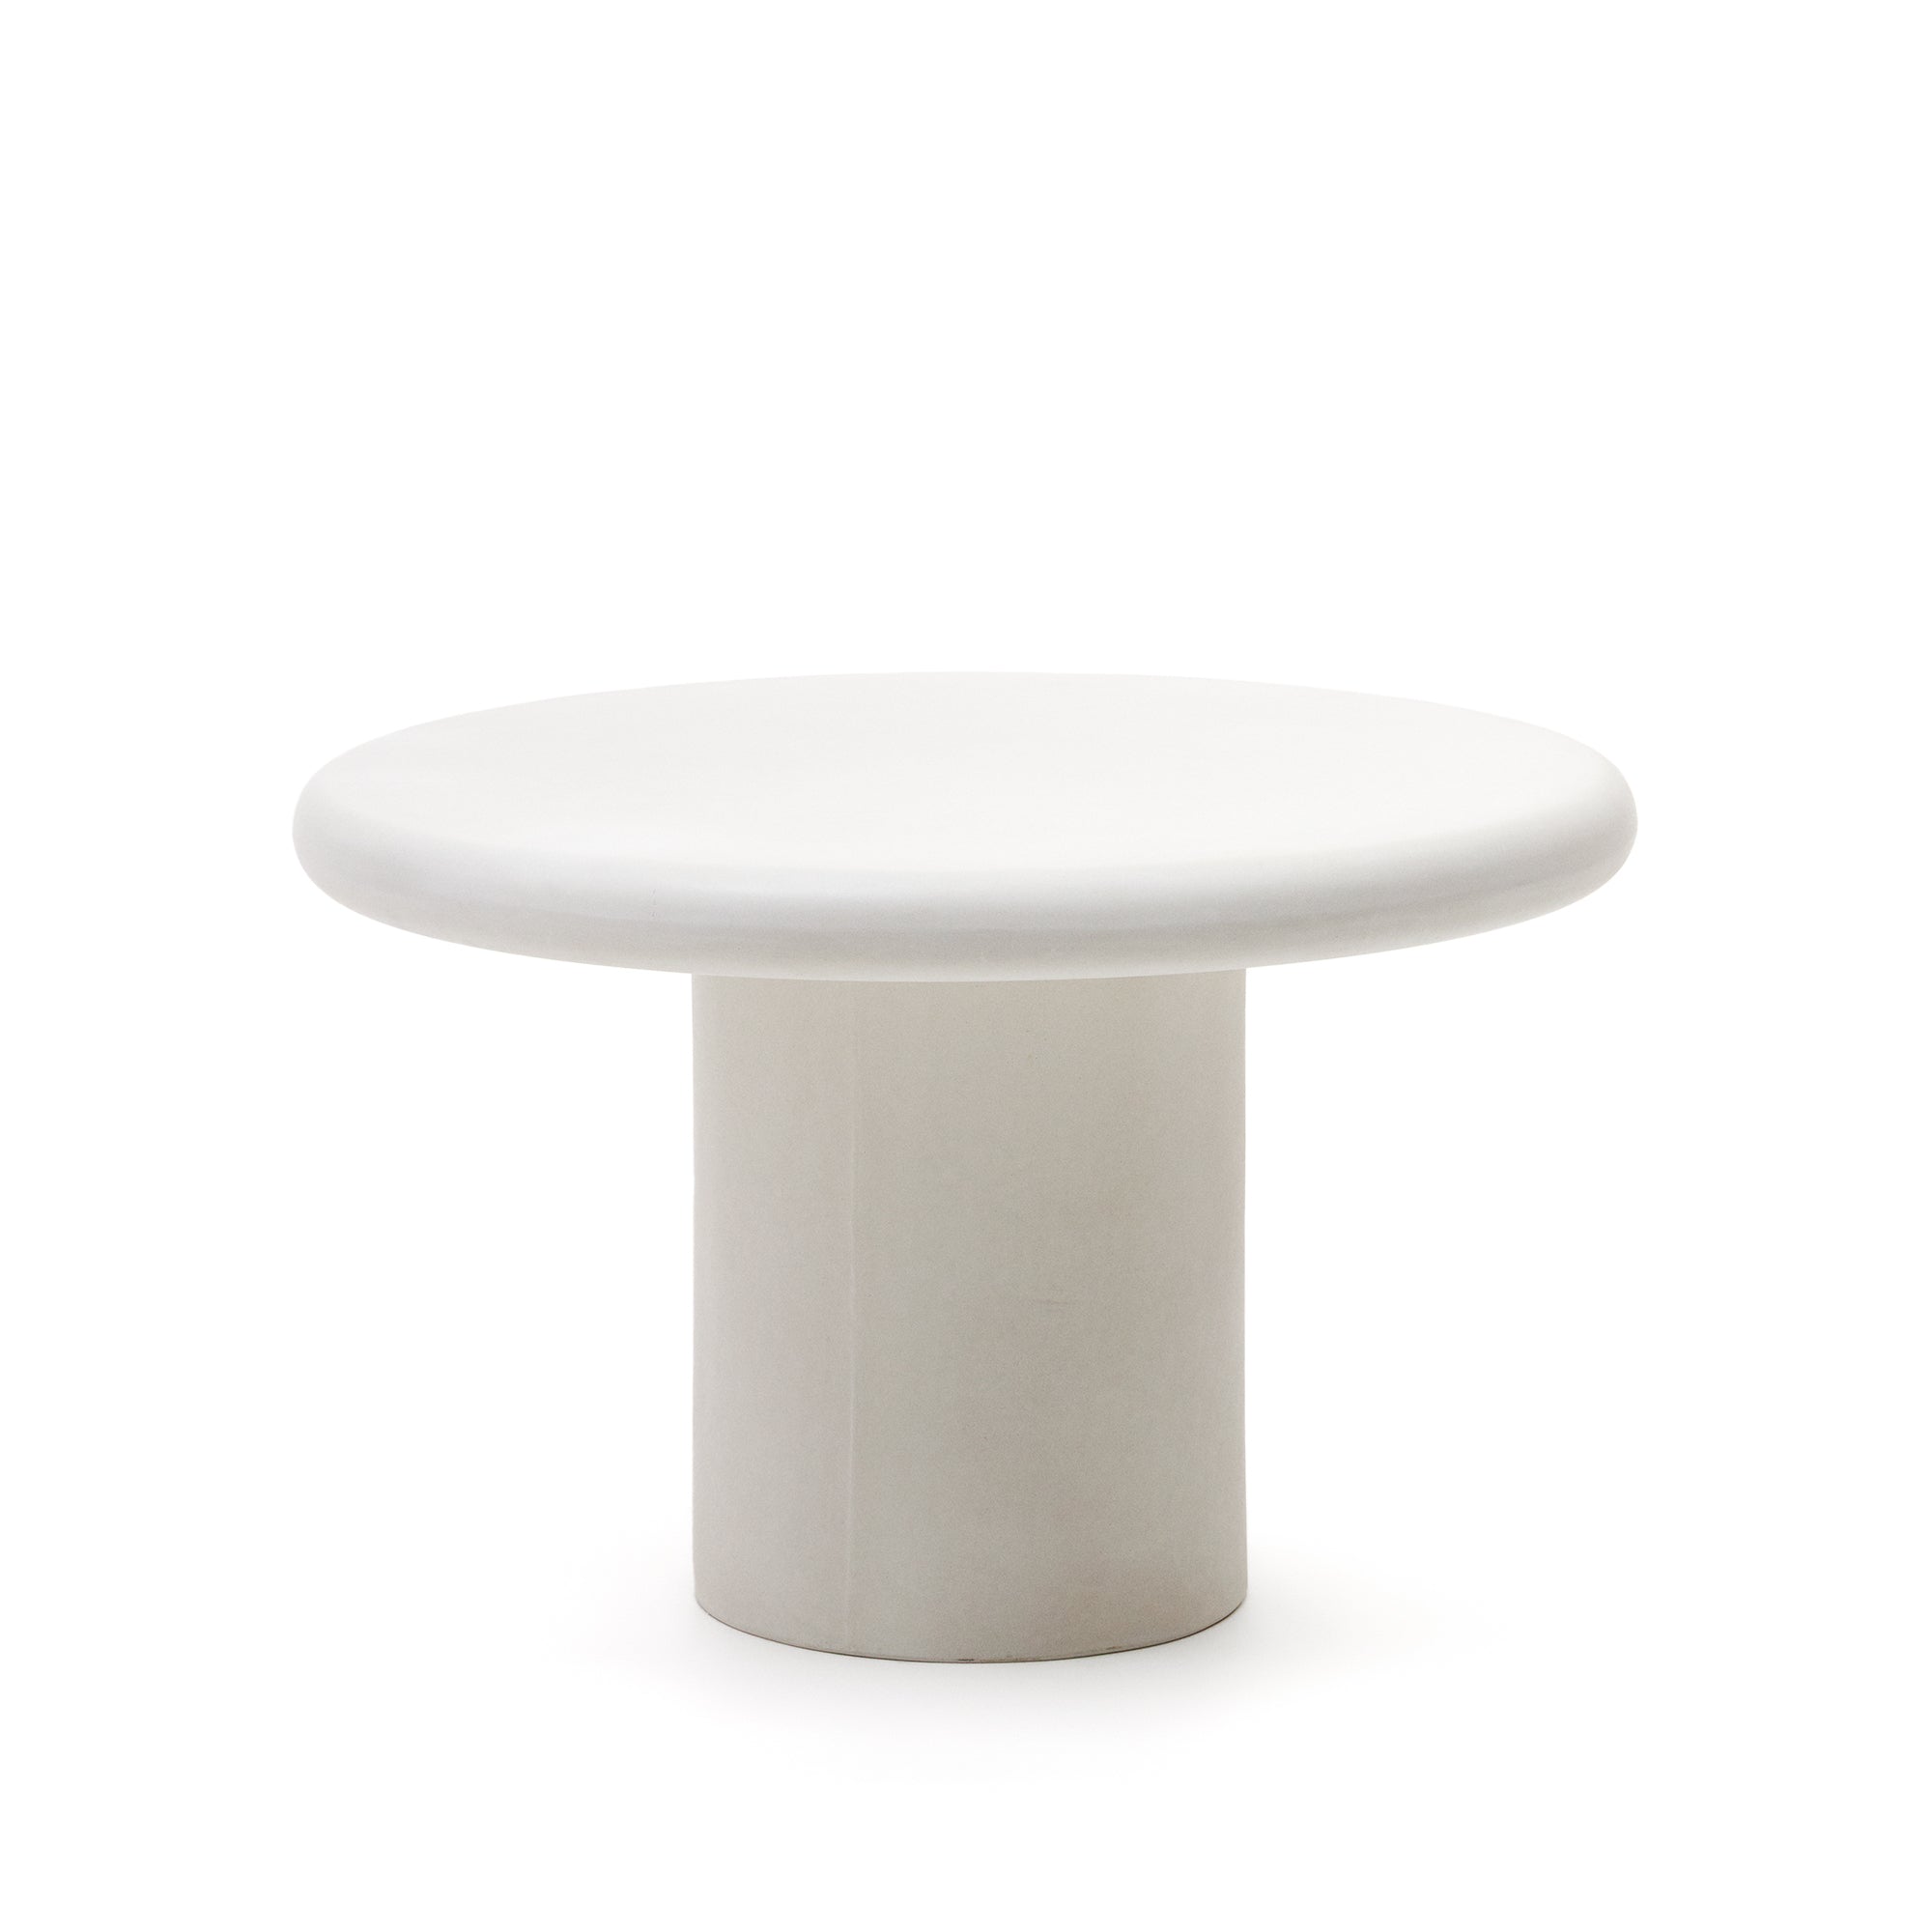 Addaia round table made of white cement Ø120 cm